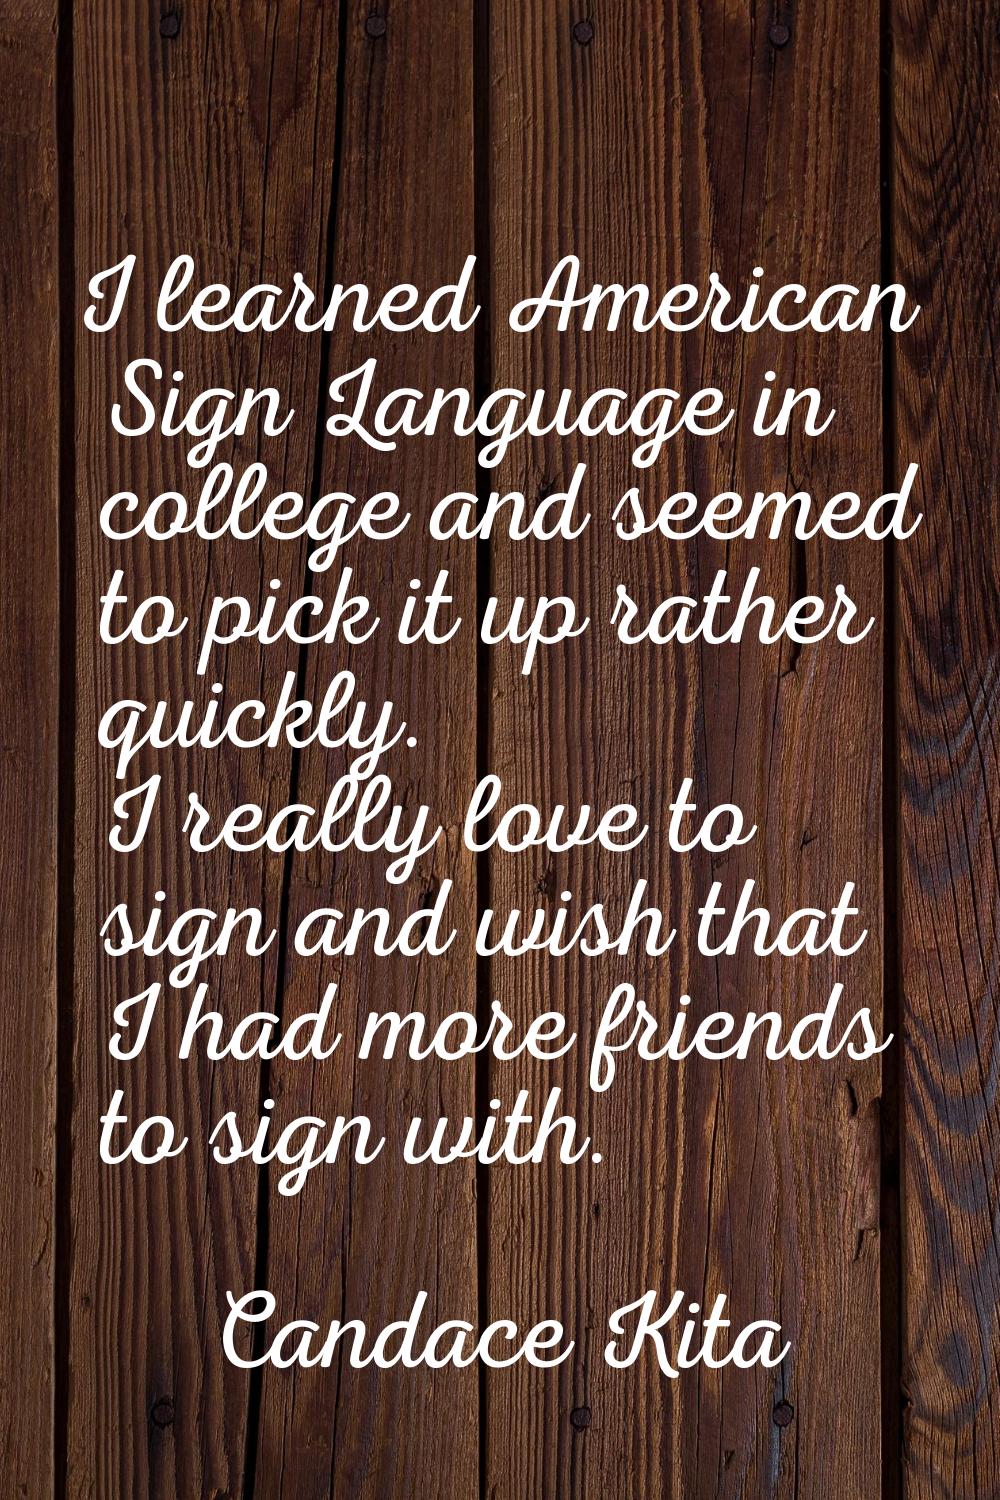 I learned American Sign Language in college and seemed to pick it up rather quickly. I really love 